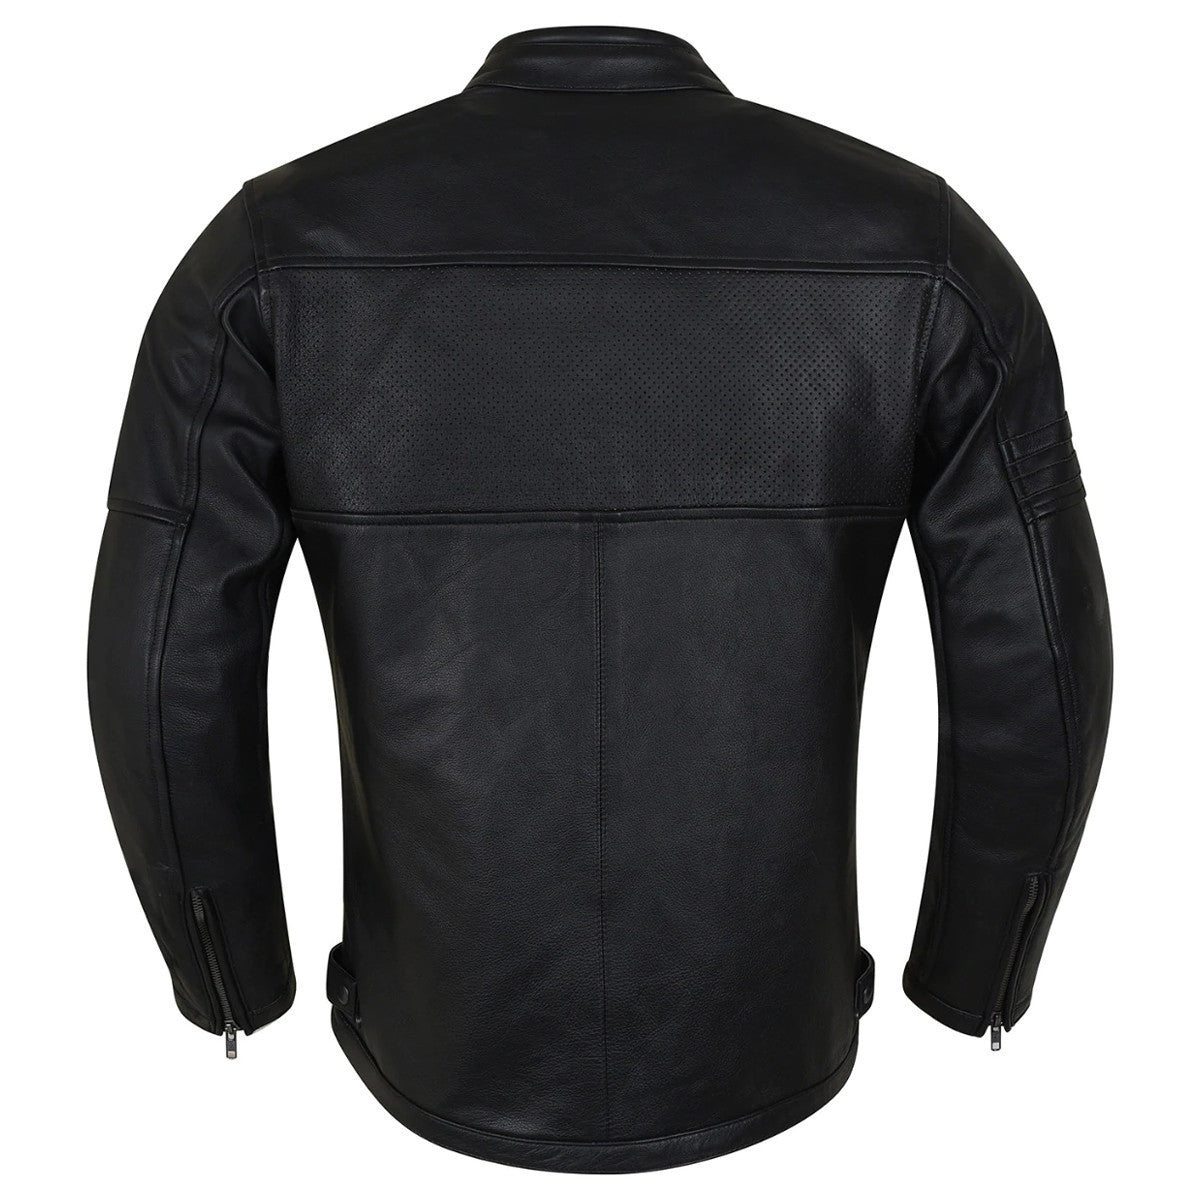 Vance Leather HMM532 Men's Commuter Cafe Racer Motorcycle Leather Jacket with Armor - back